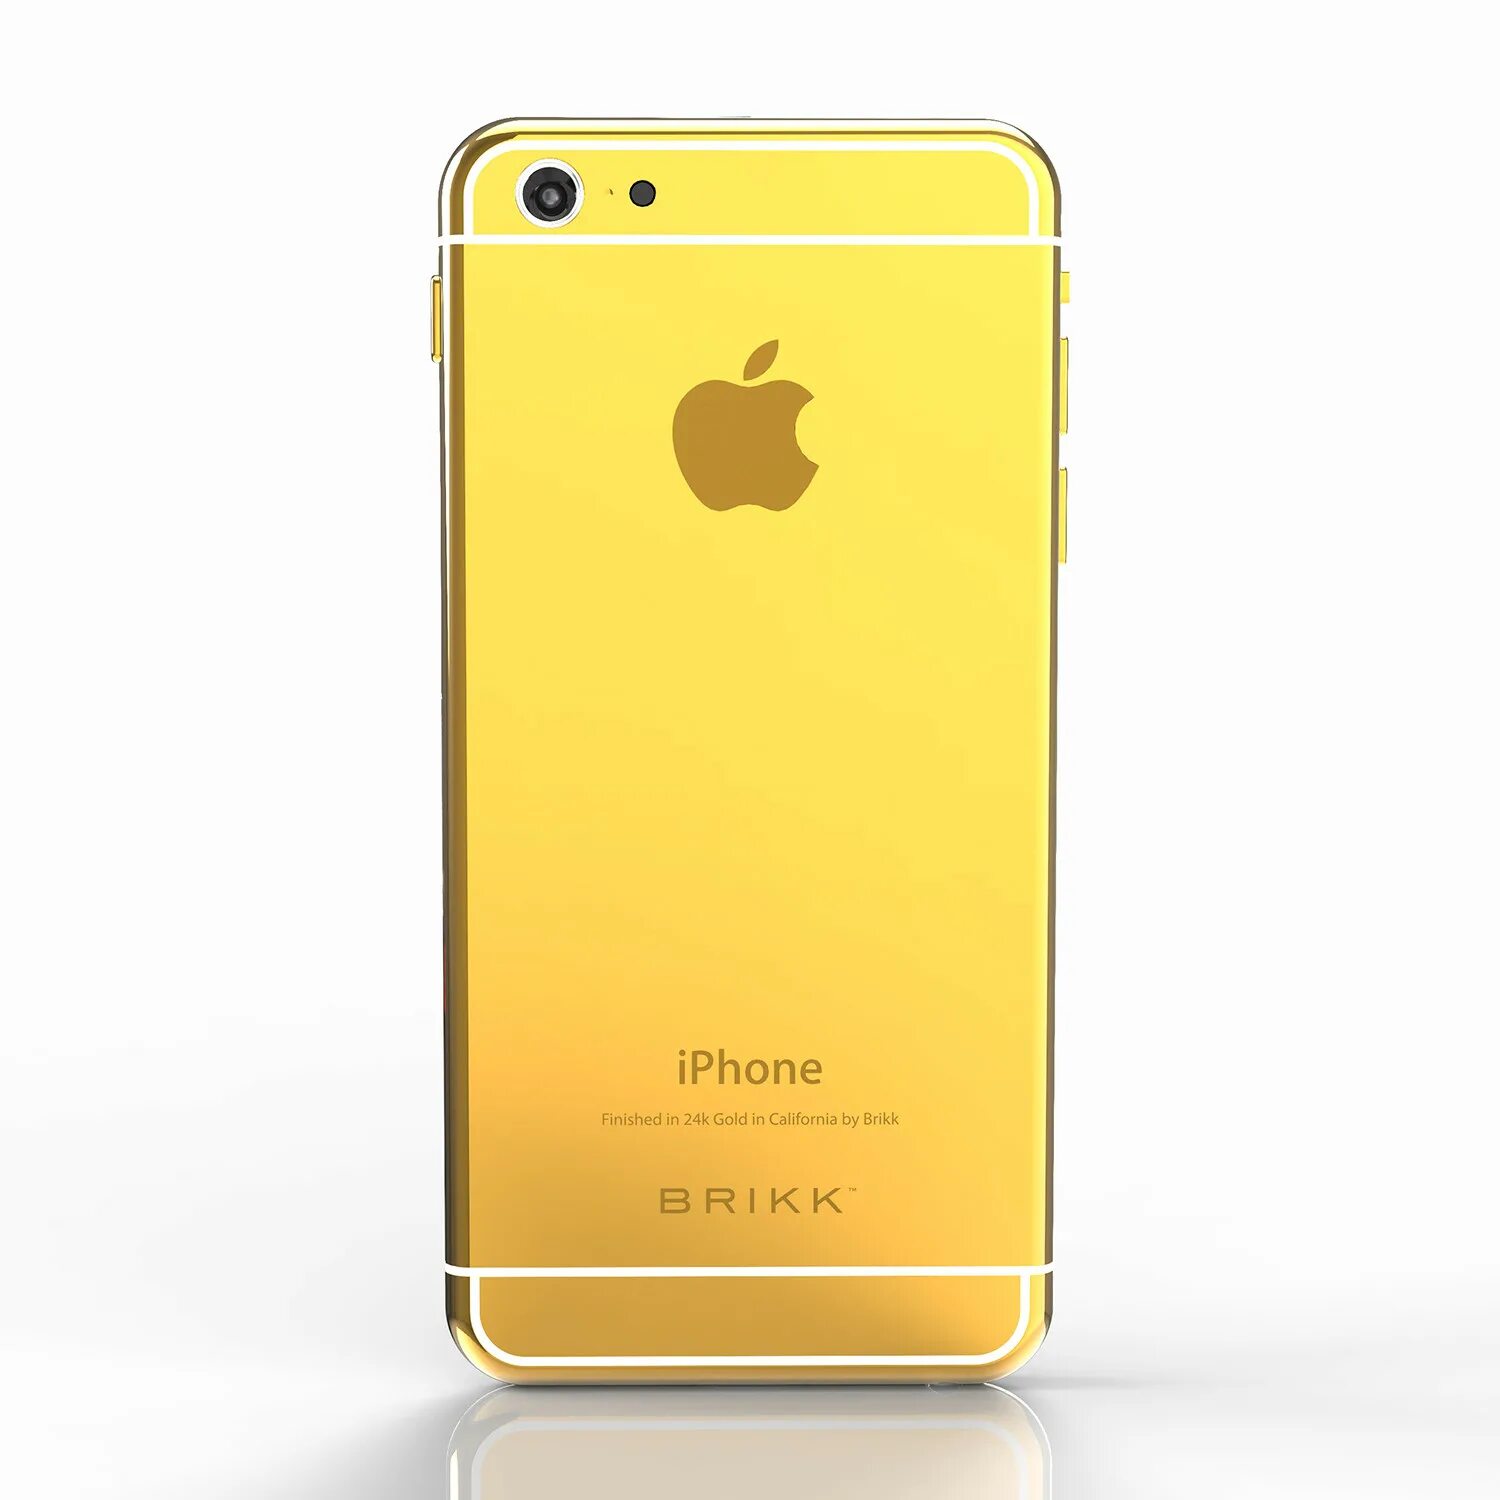 Gold mobile. Iphone 6 Gold. Iphone 6s Gold. Apple iphone Gold. Iphone 6 Pro.